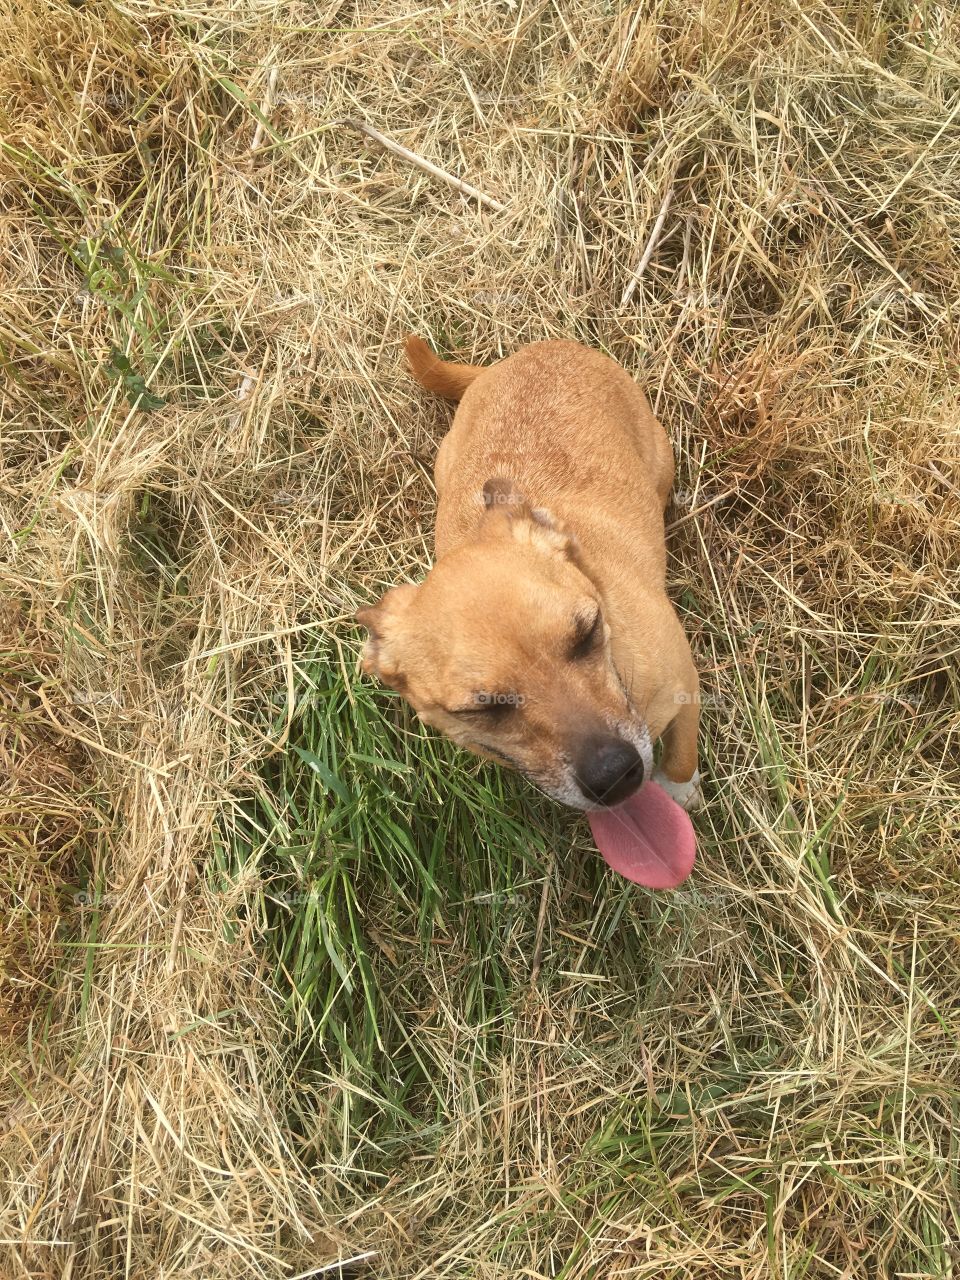 Spot the chihuahua. He blends in with the dry golden grass he pauses on . He looks cute with his pink tongue hinting that he has been running 